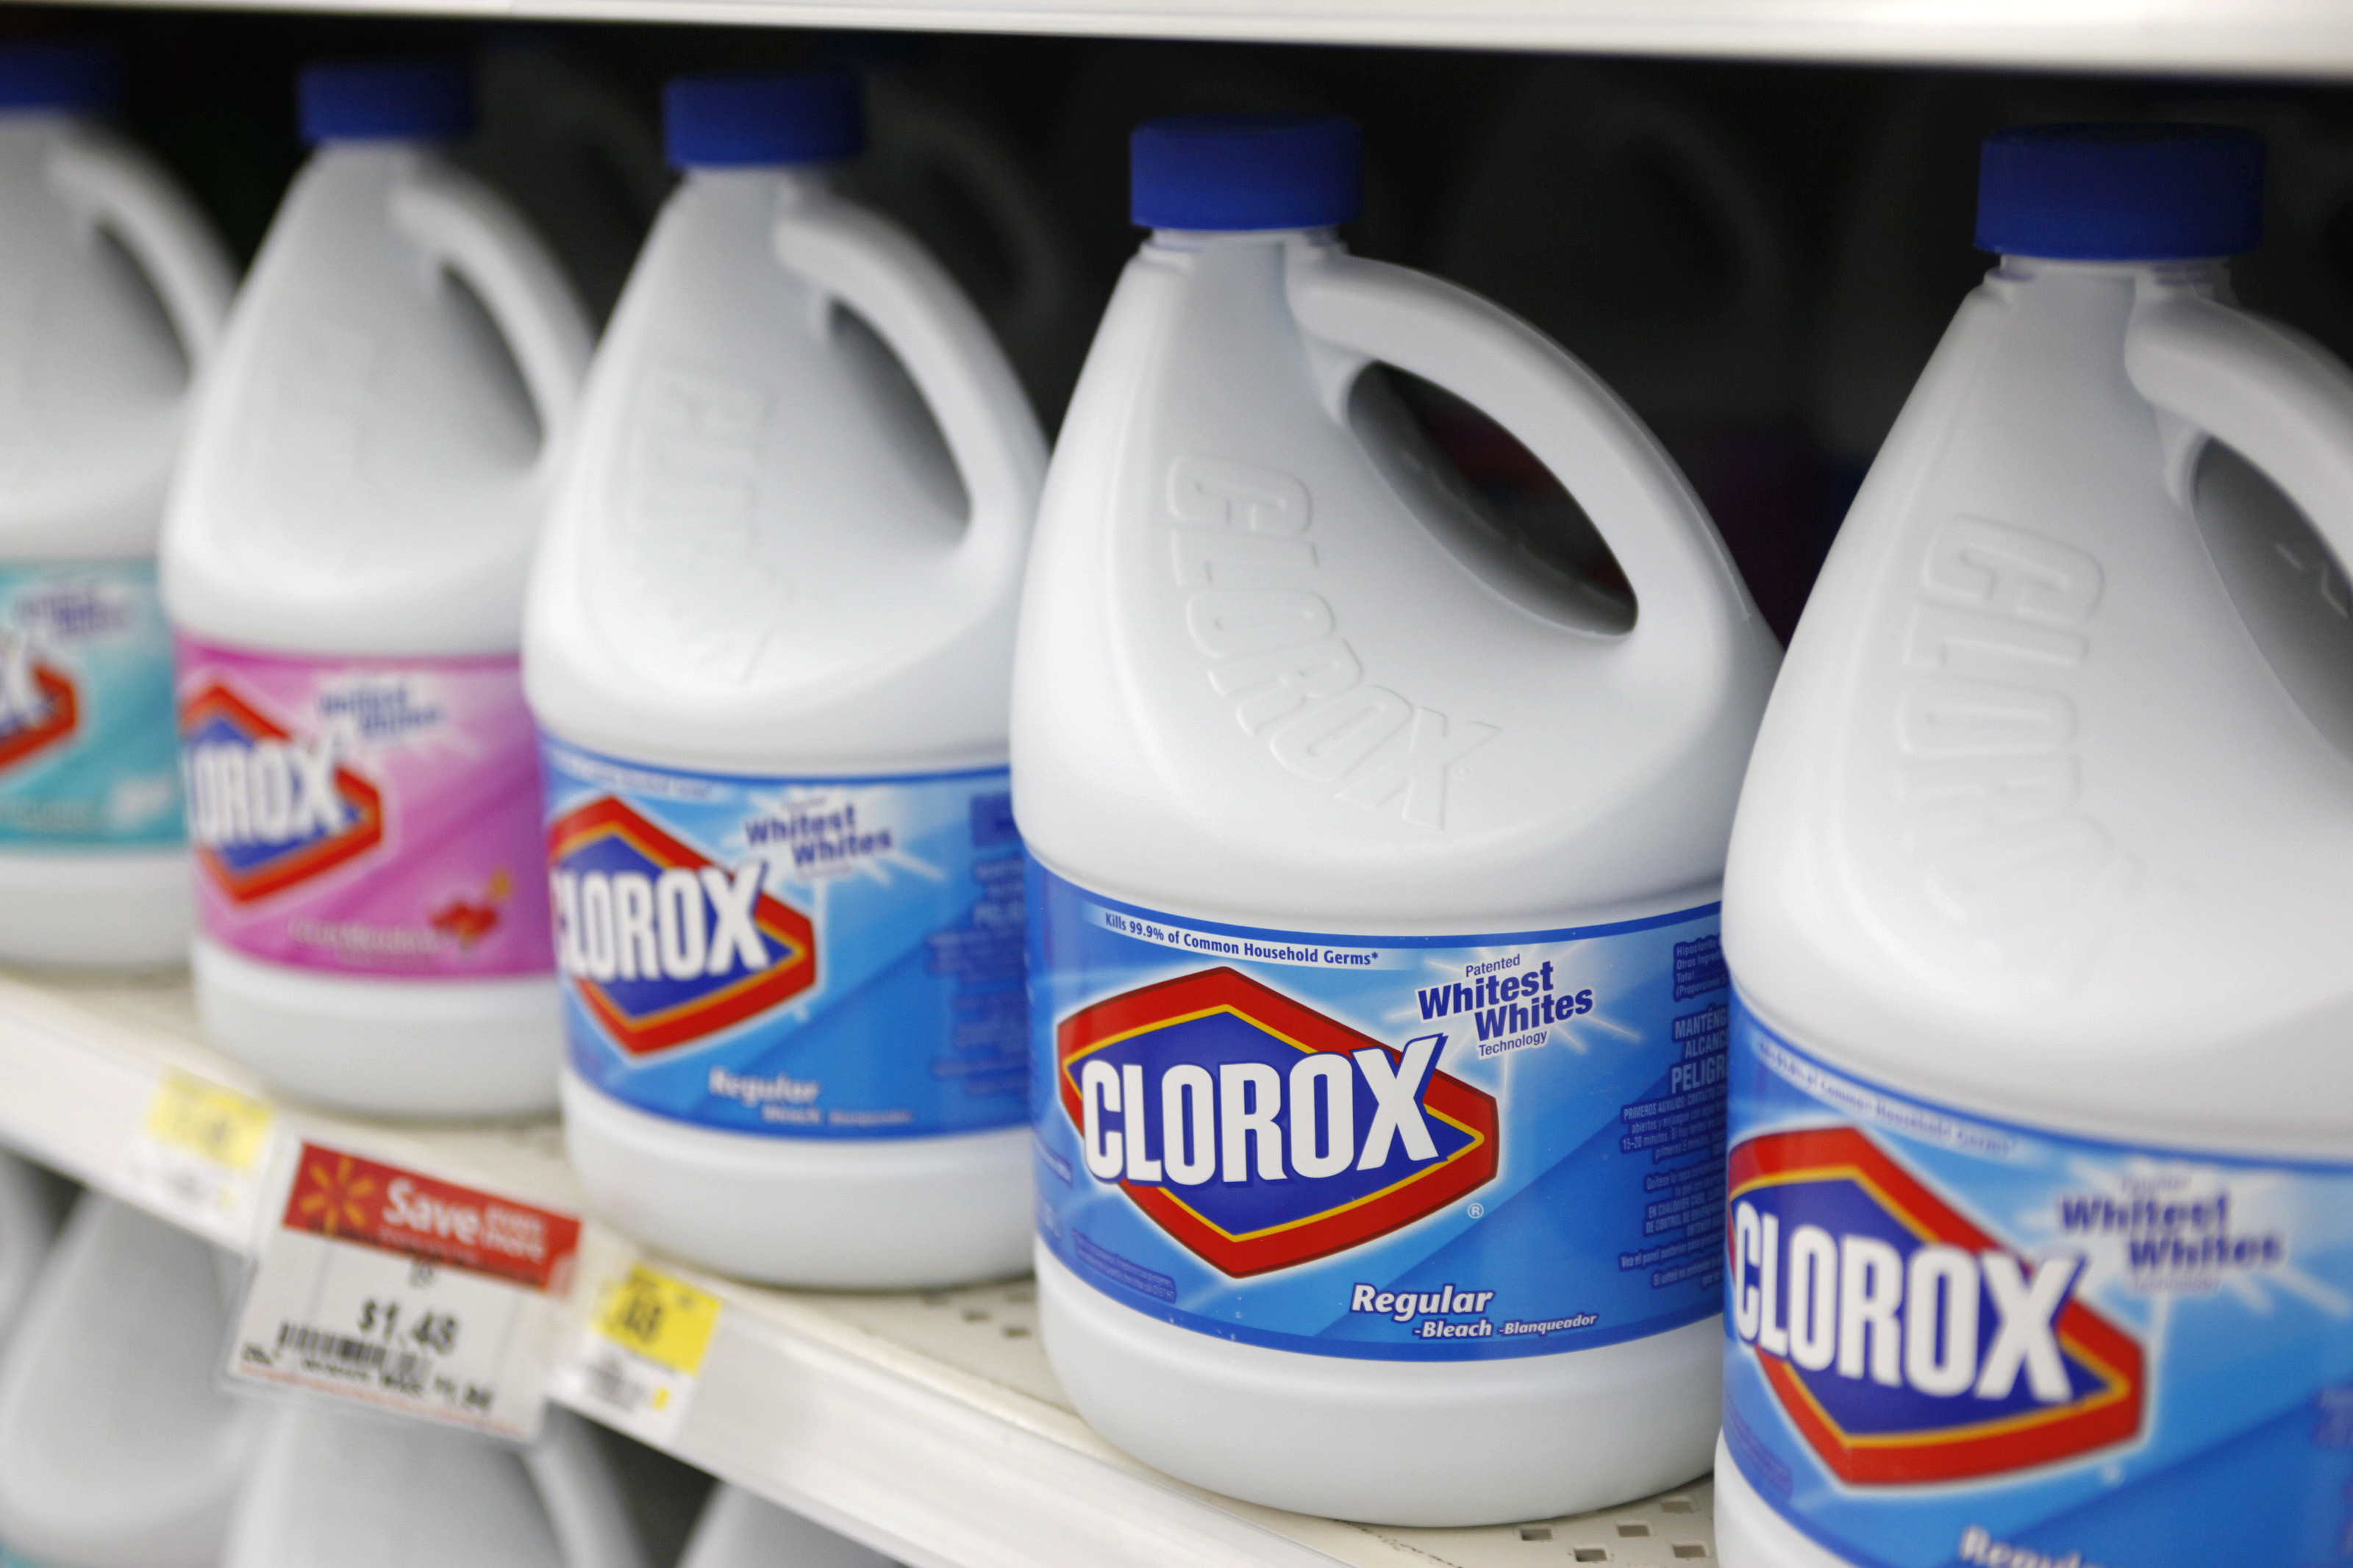 Bottles of Clorox bleach are displayed for sale on the shelves of a Wal-Mart store in Rogers